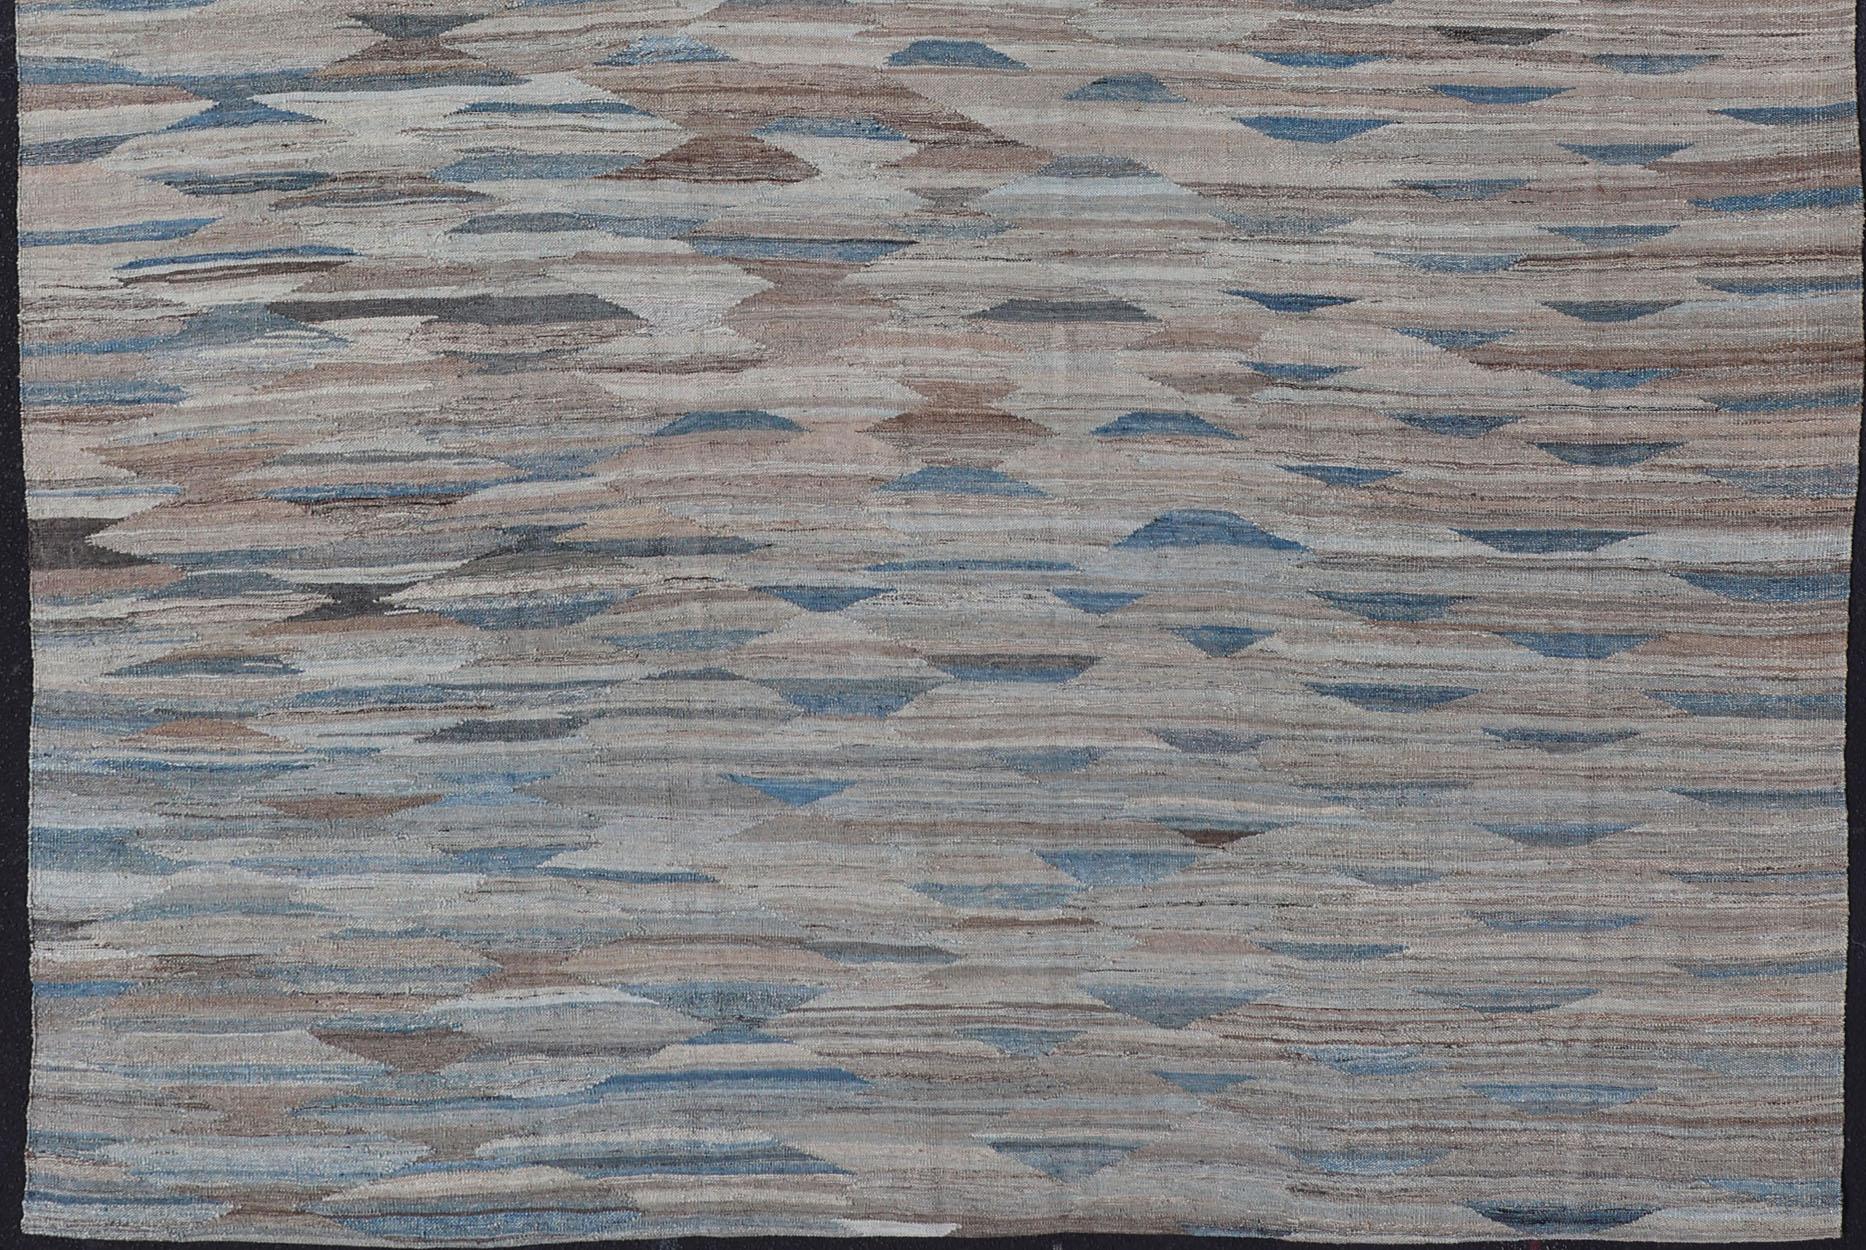 Hand-Woven  Modern Kilim with Geometrics in  variation of Blue , Brown, Tan & Neutral Tones For Sale